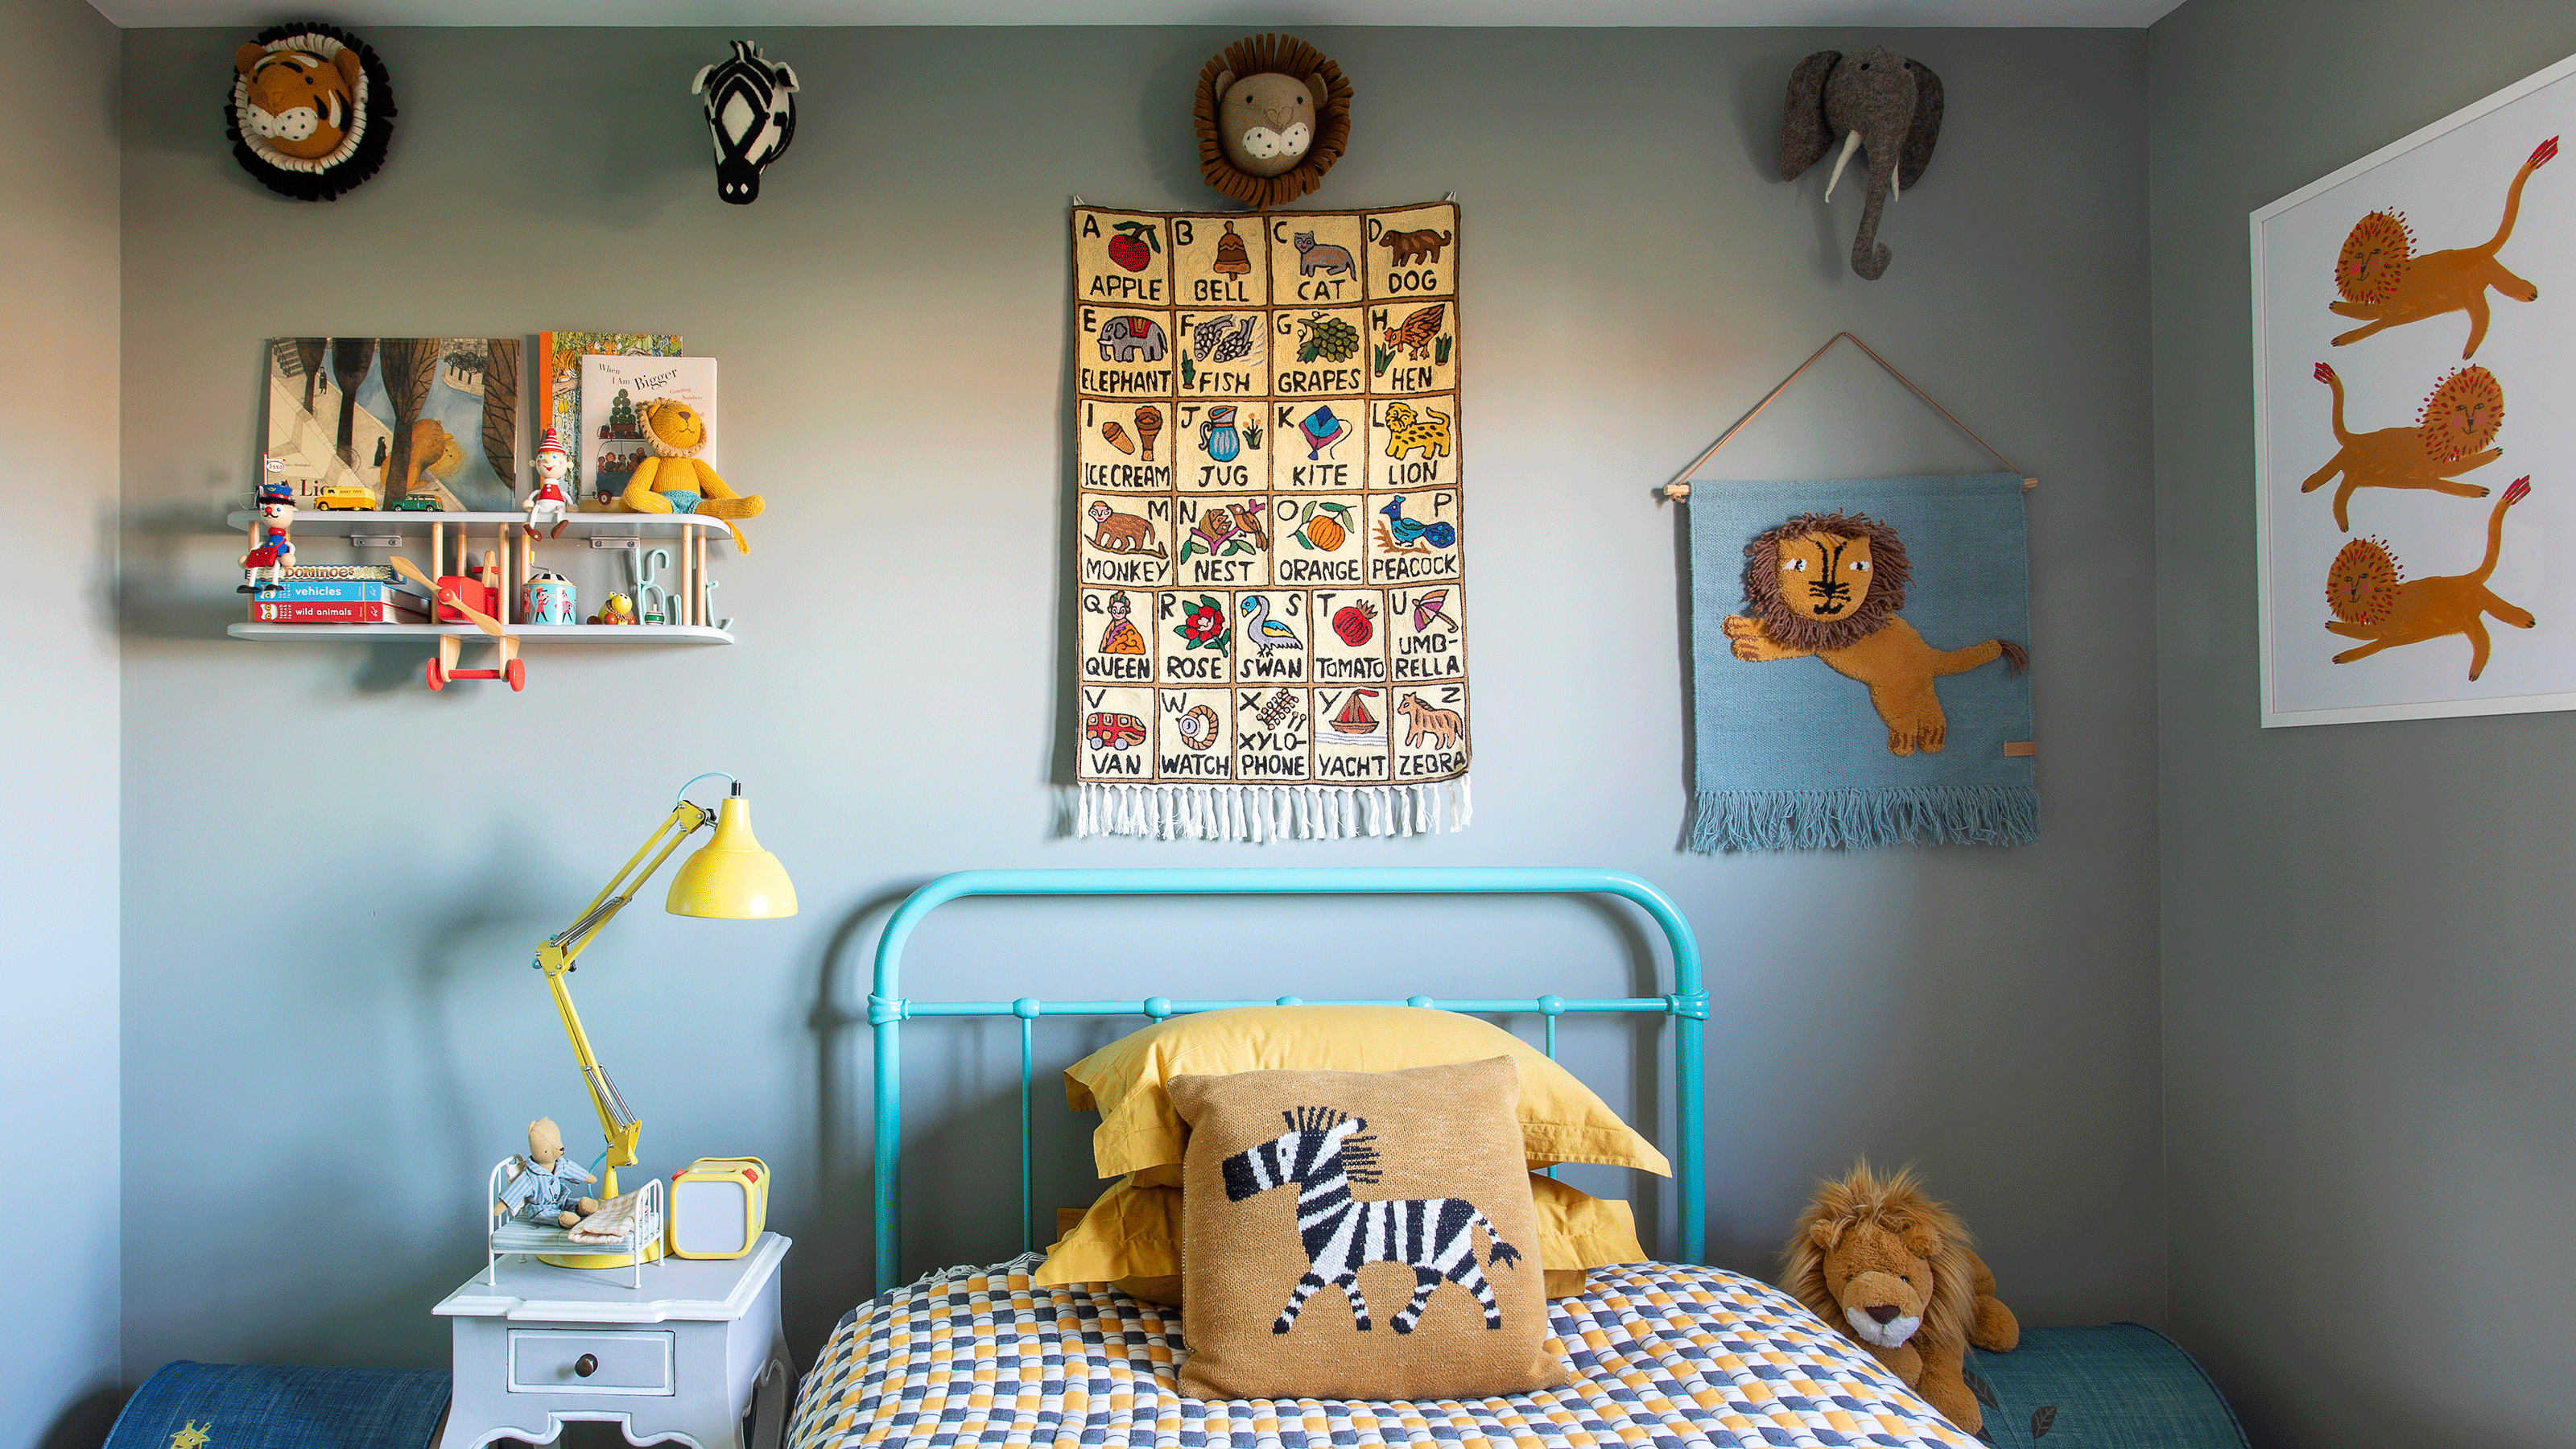 A kid's bedroom painted pale blue with yellow accents, including a bedside lamp, zebra cushion, lion tapestry and alphabet poster